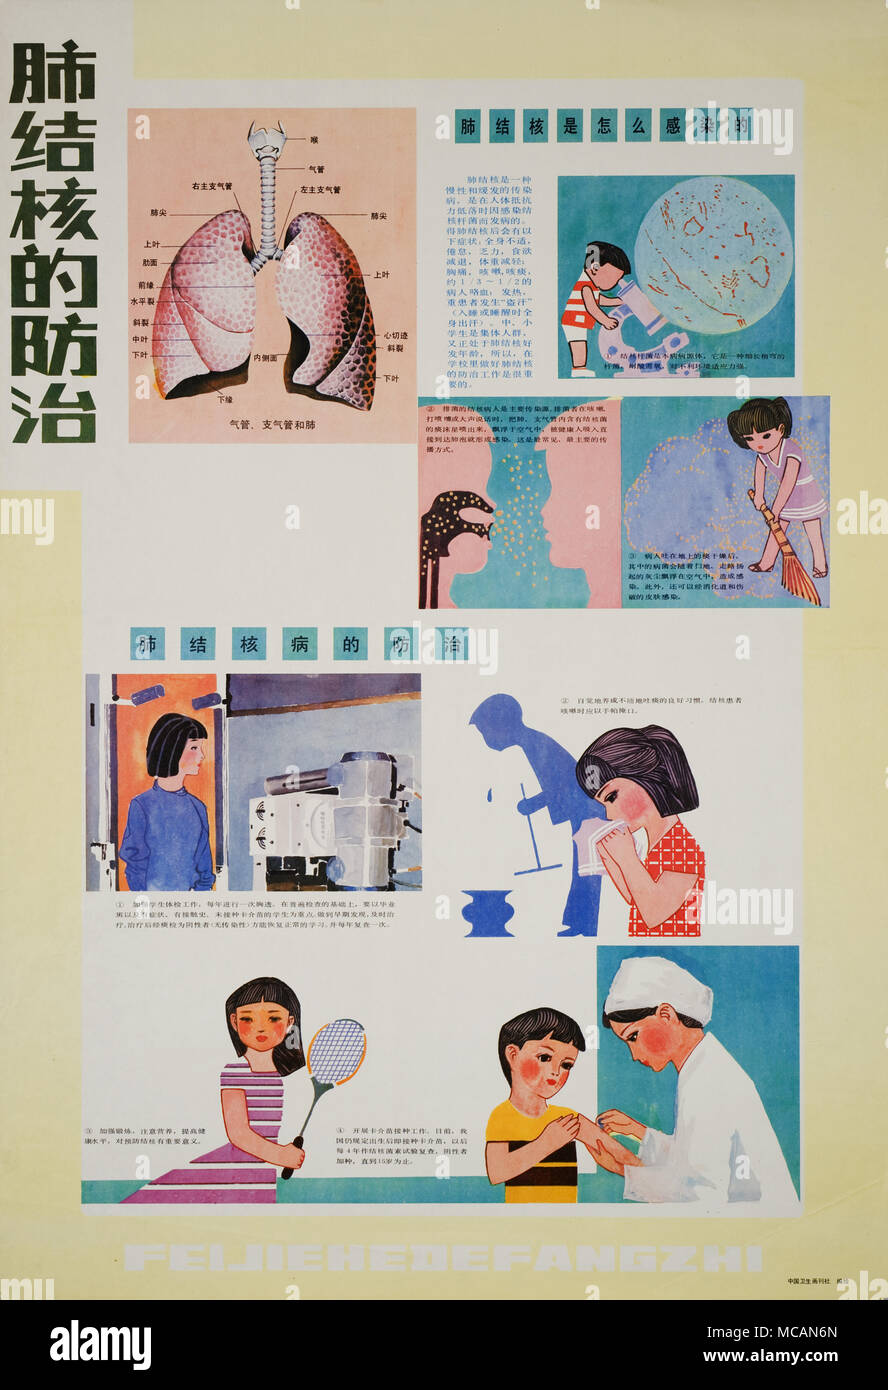 How to prevent TB. The top left side shows a picture of lungs. The top right side shows a young boy looking through the microscope at the Mycobacterium tuberculosis. Below him are two images showing direct and indirect ways of spreading the infection. Four images at the lower half of the poster show importance of regular examinations, healthy living habits, exercise and getting a BCG vaccine. This poster aims at students in particular. Stock Photo